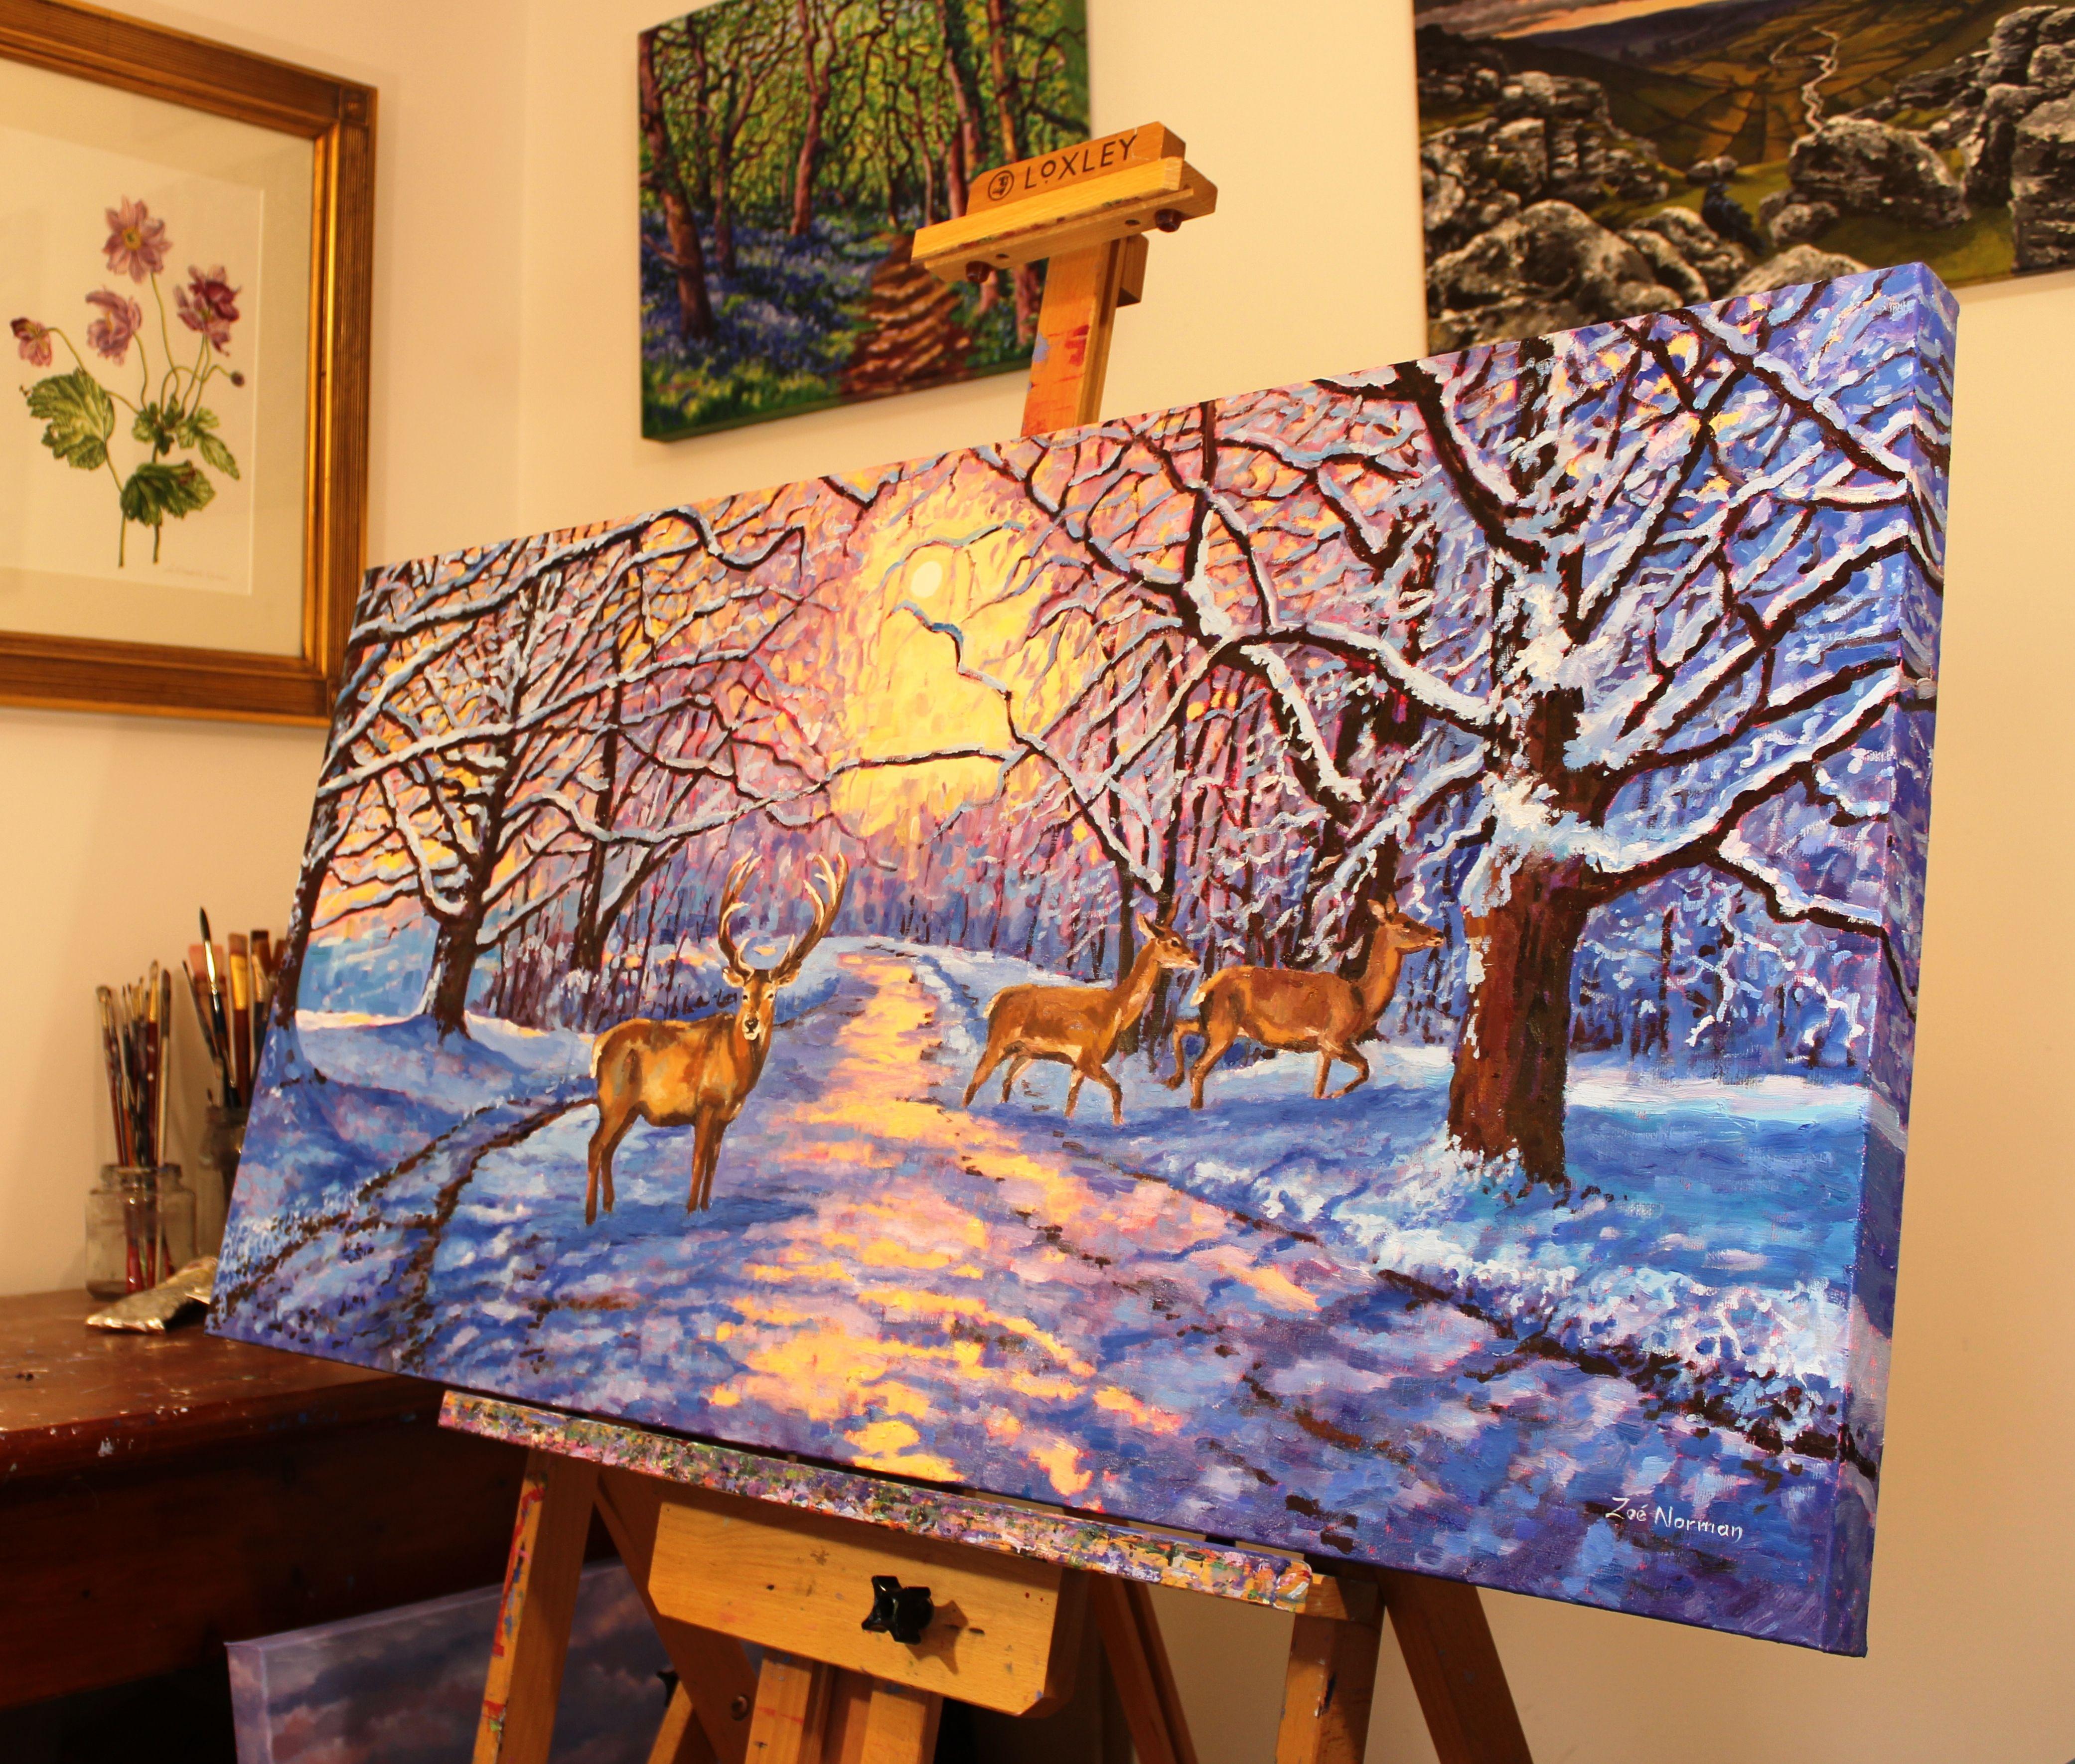 Contemporary Impressionism.  Large oil painting of an evening winter landscape scene with crossing red deer.  Painted with lively brush strokes and thickly applied vibrant oil paints; this is a unique and spectacular statement piece full of vivacity